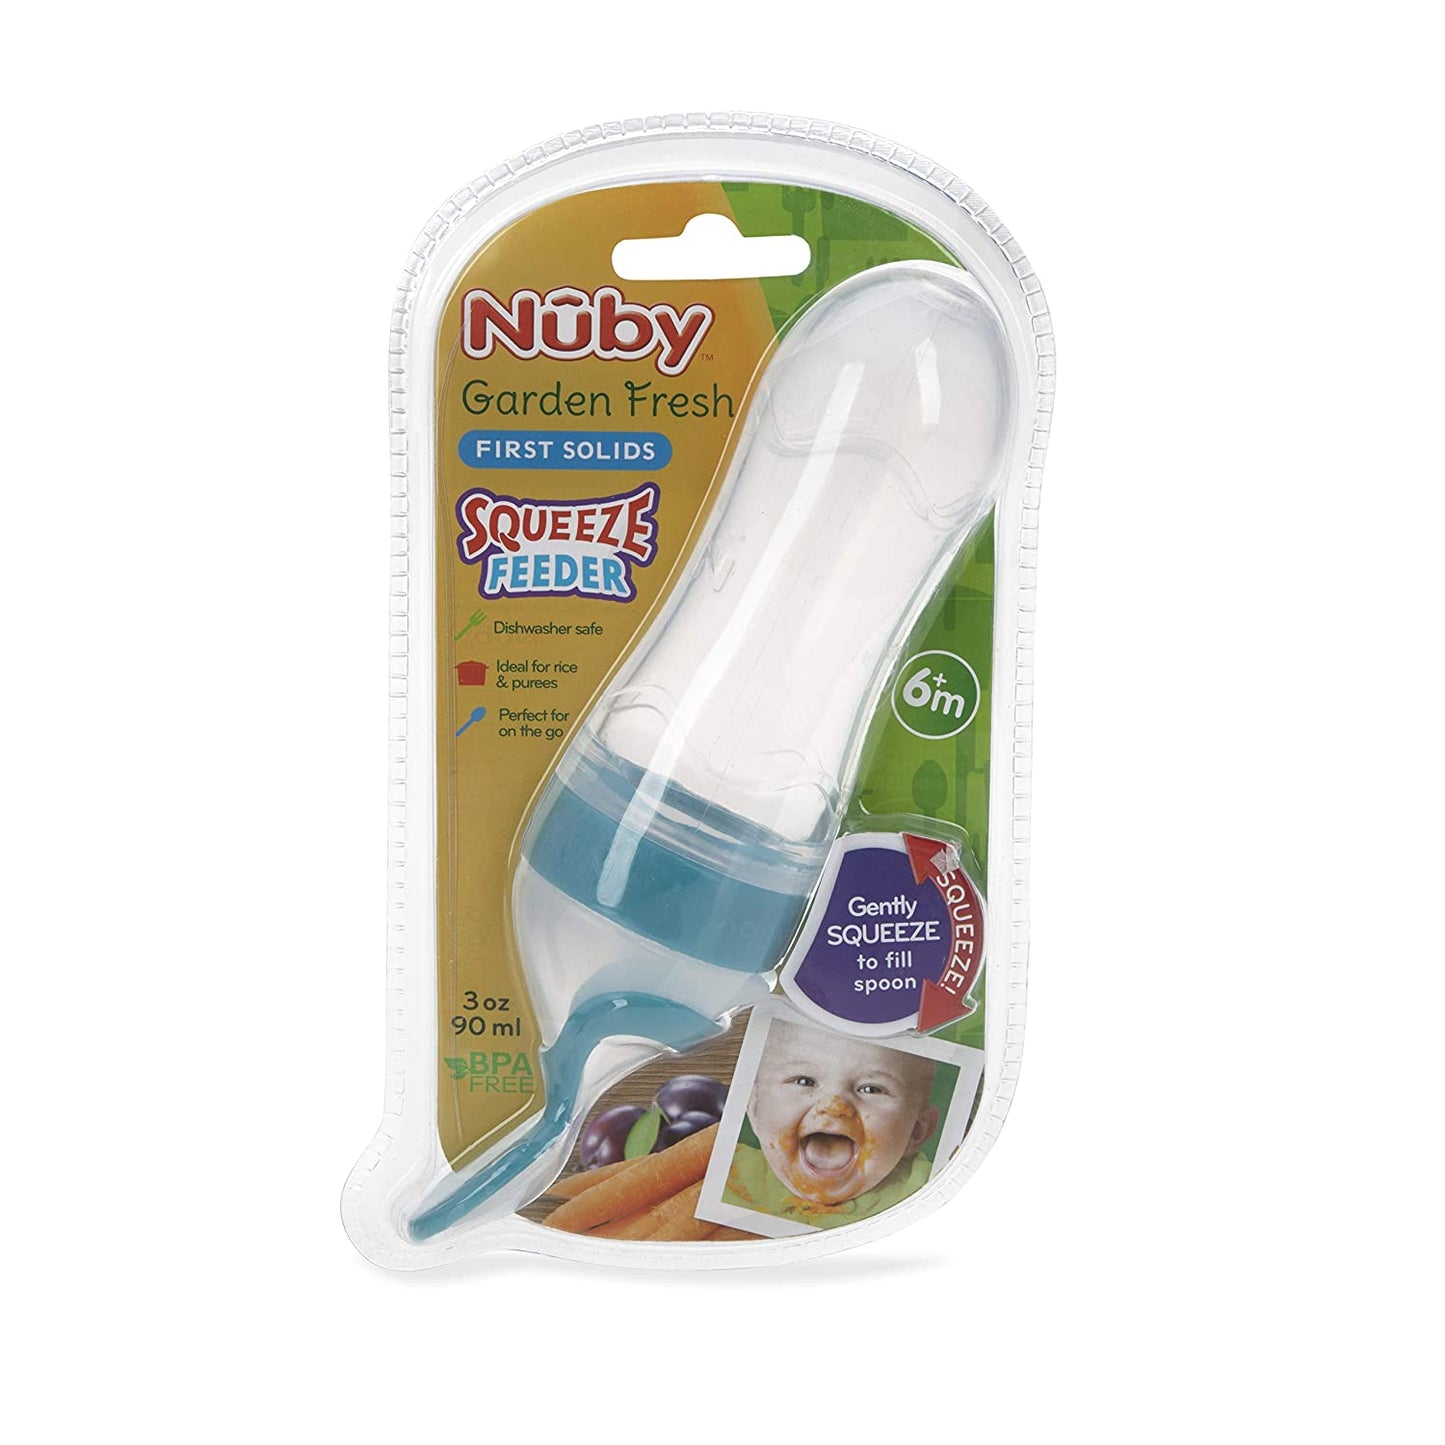 Nuby Garden Fresh Silicone Squeeze Feeder with Spoon and Hygienic Cover, Colors May Vary